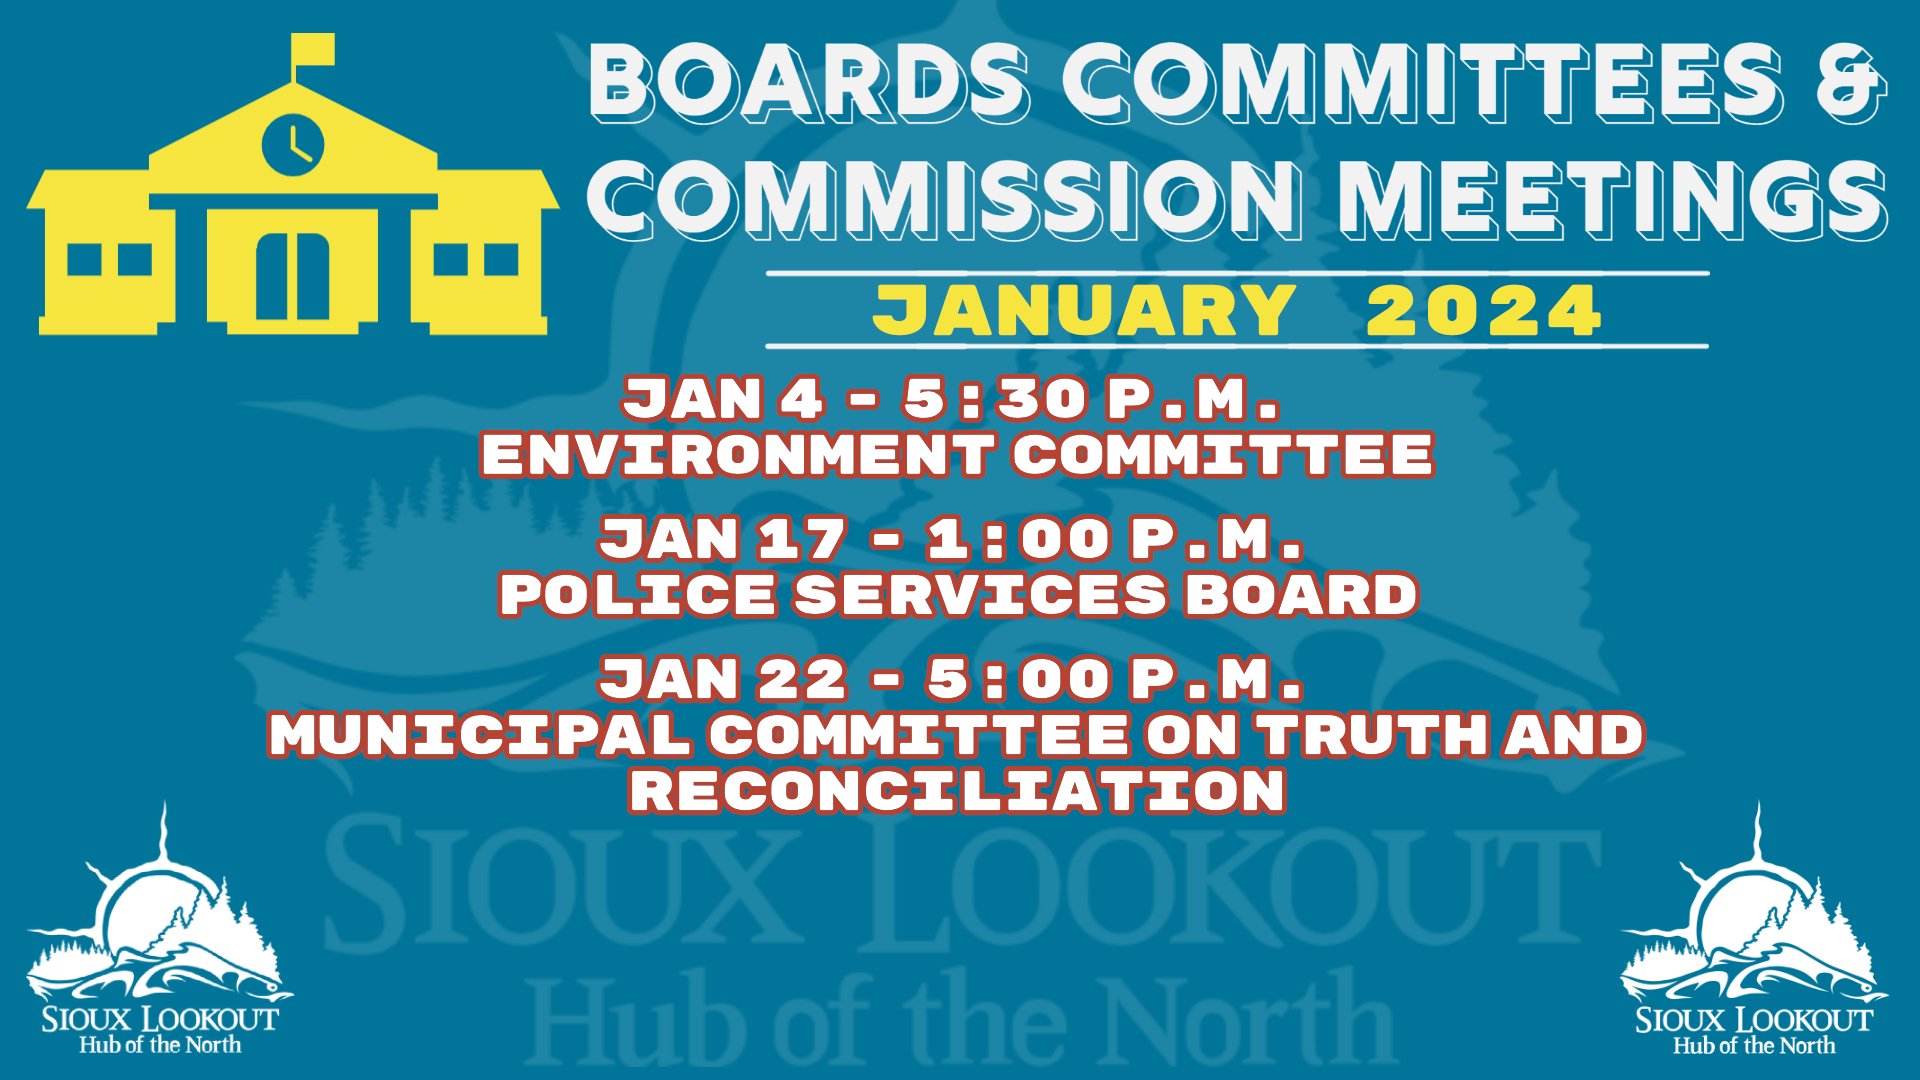 Board and Committee Meetings - January 2024